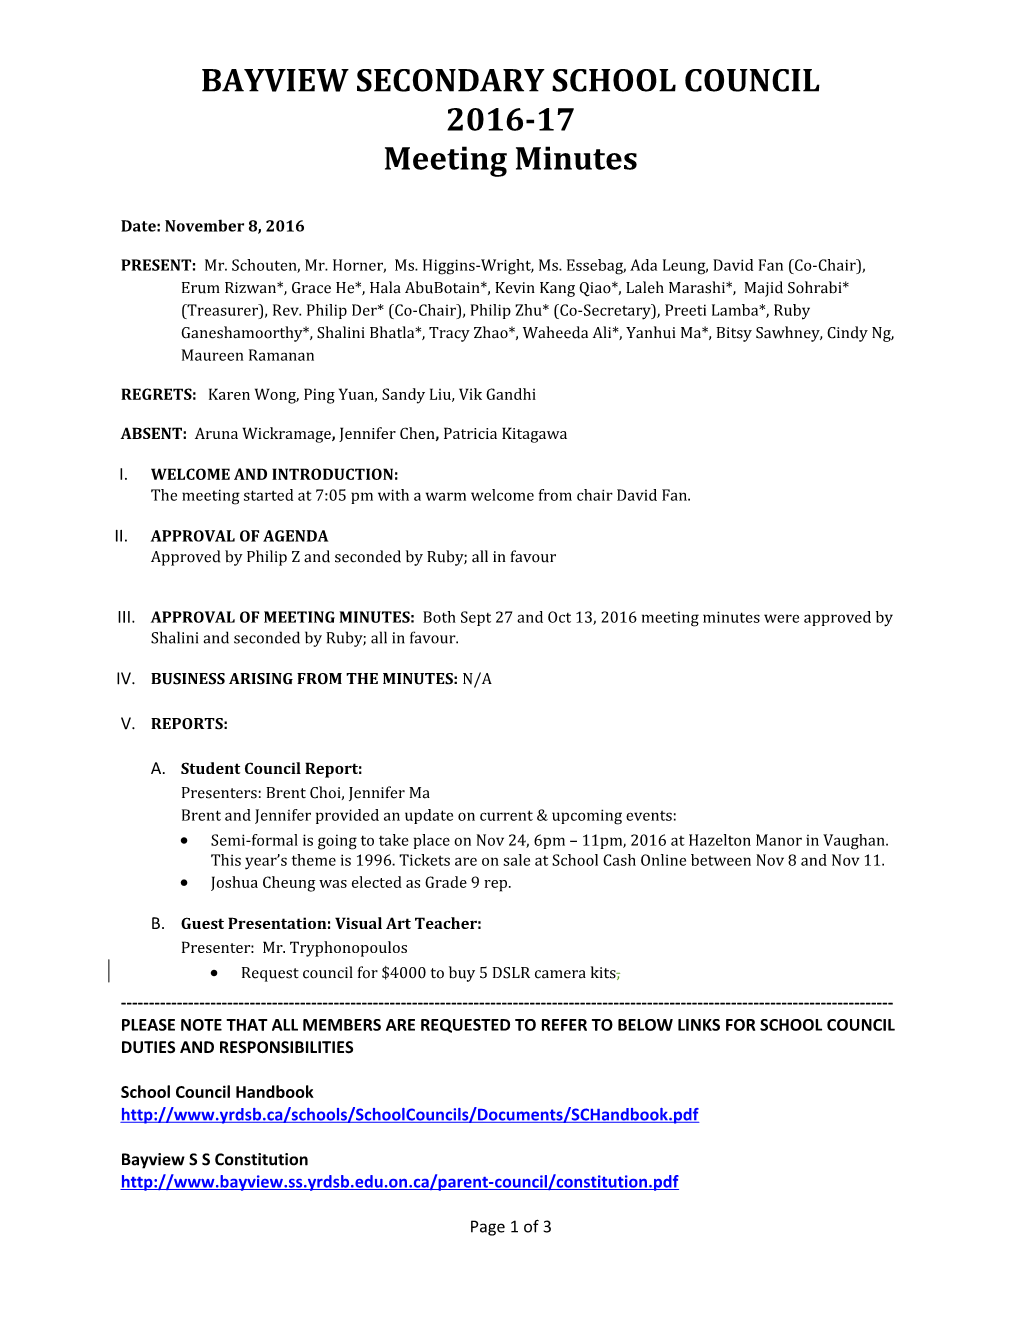 Bayview School Council Meeting Minutes